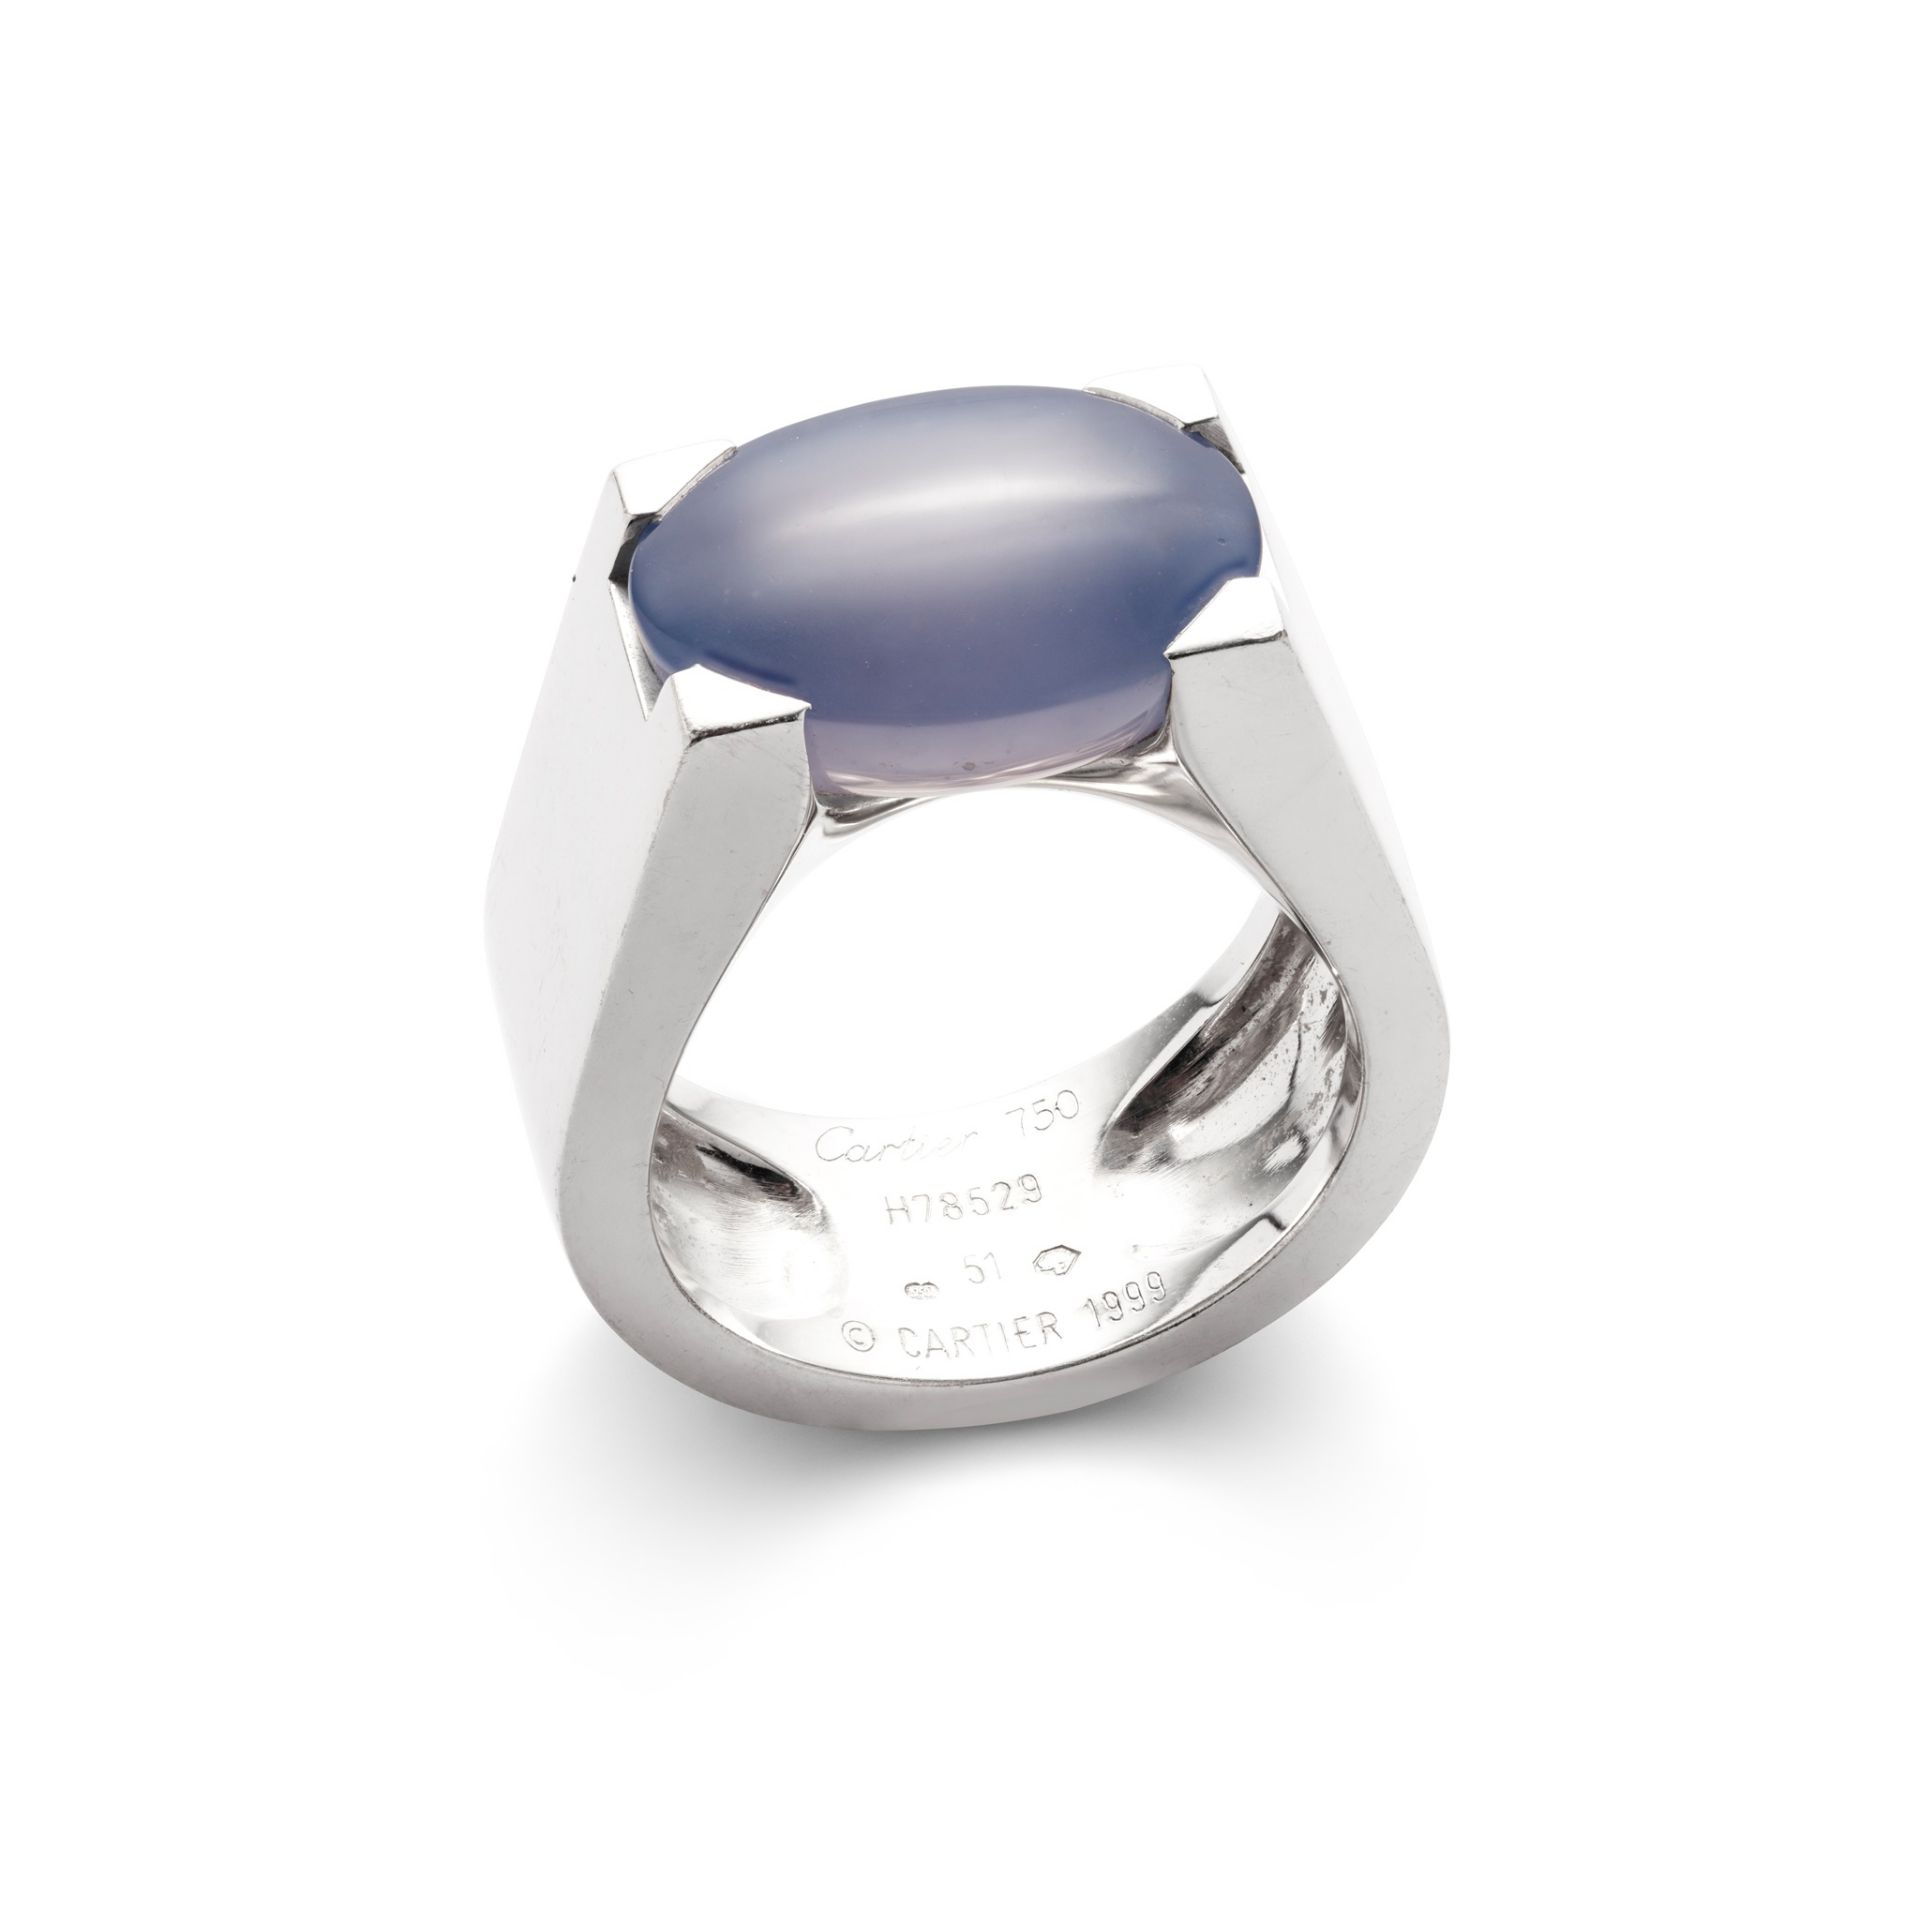 A chalcedony 'Tankissime' ring, by Cartier The oval-shaped blue chalcedony, to a wide polished